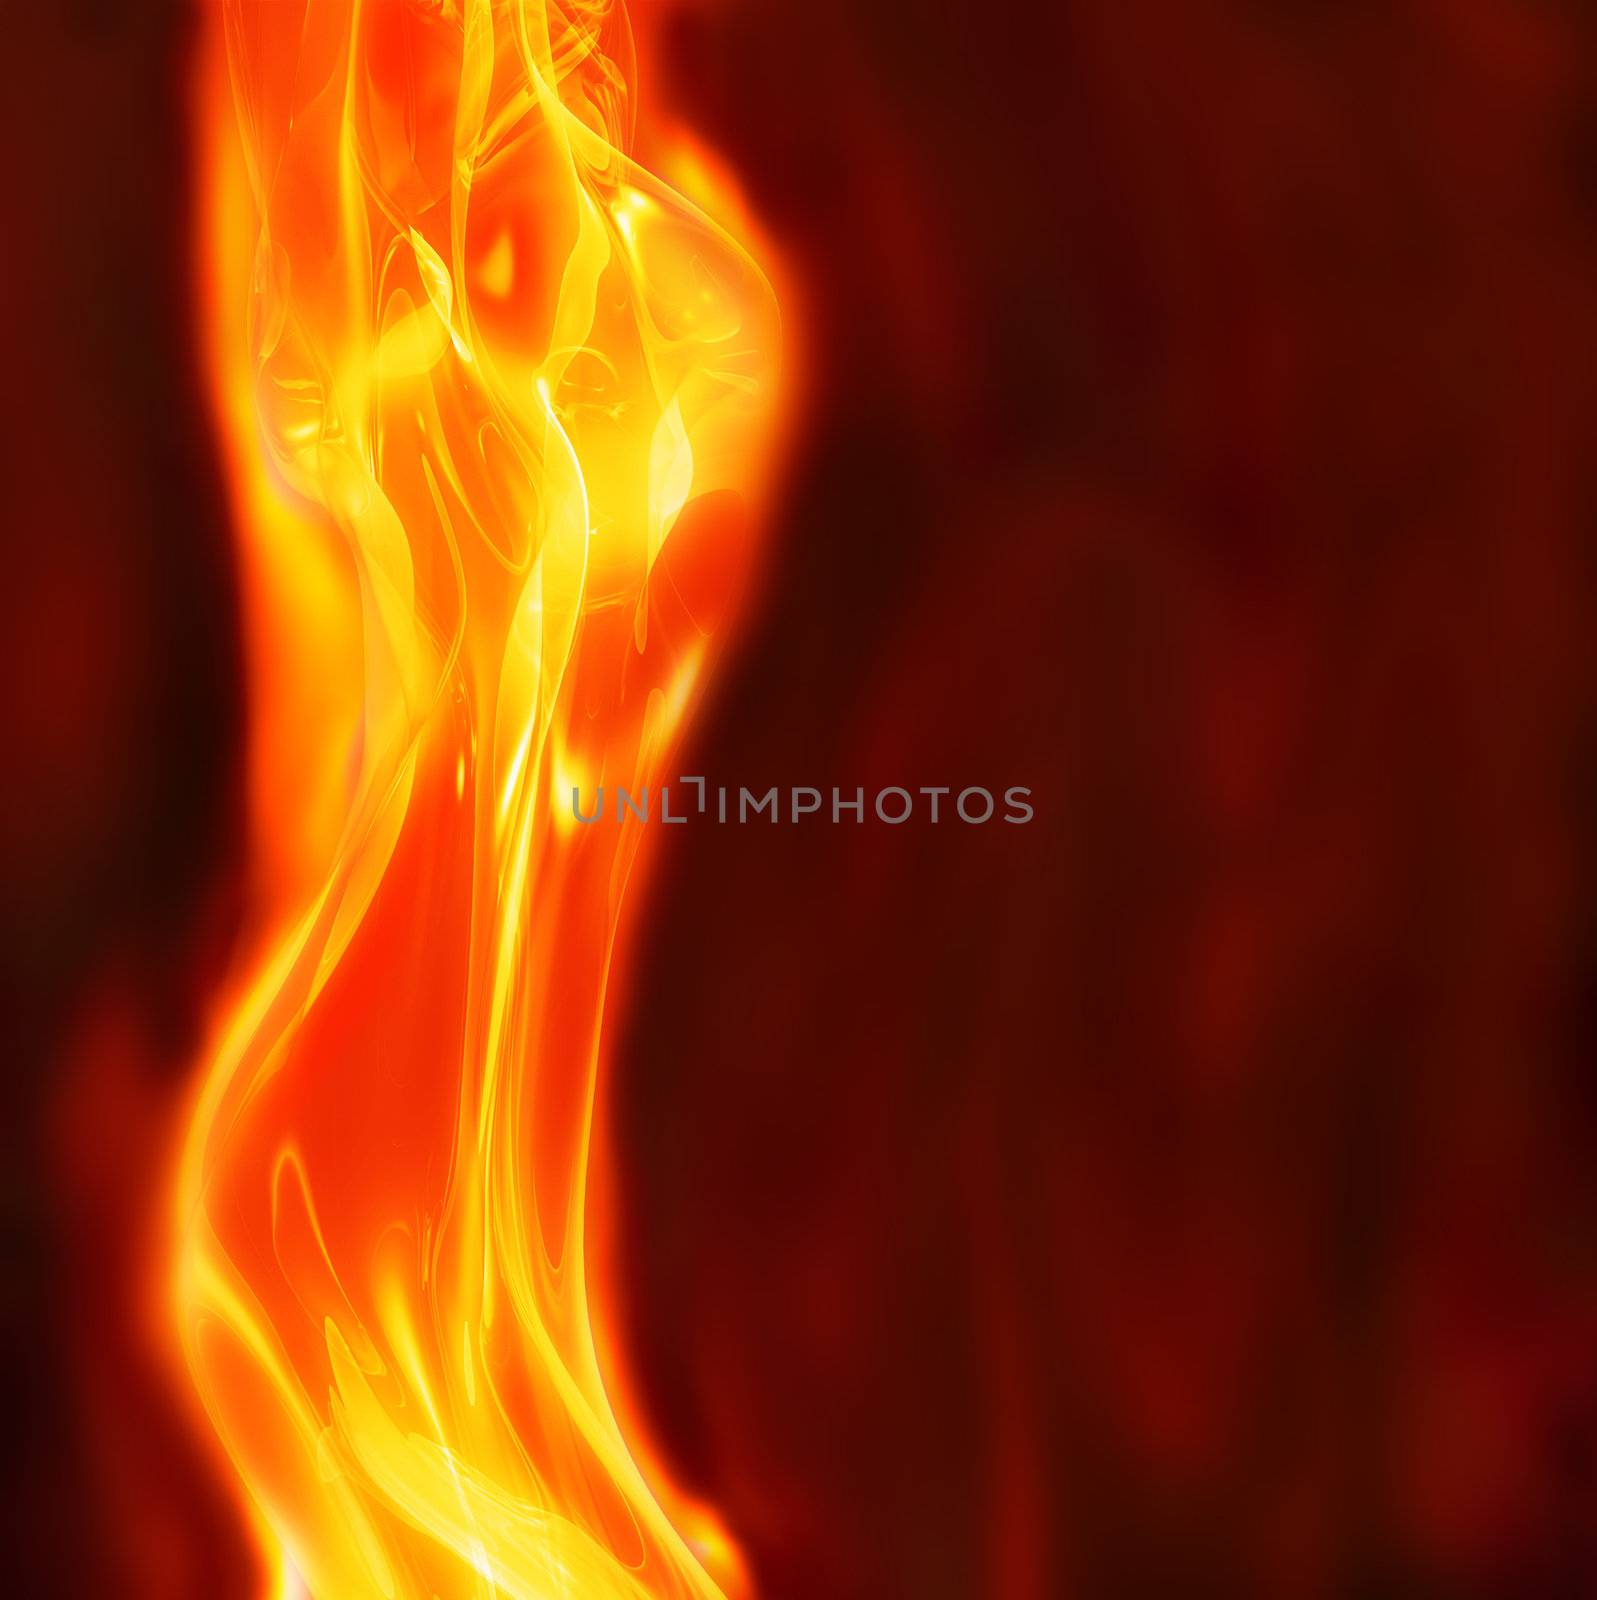 excellent abstract art image depicting  glowing female body fire and flames